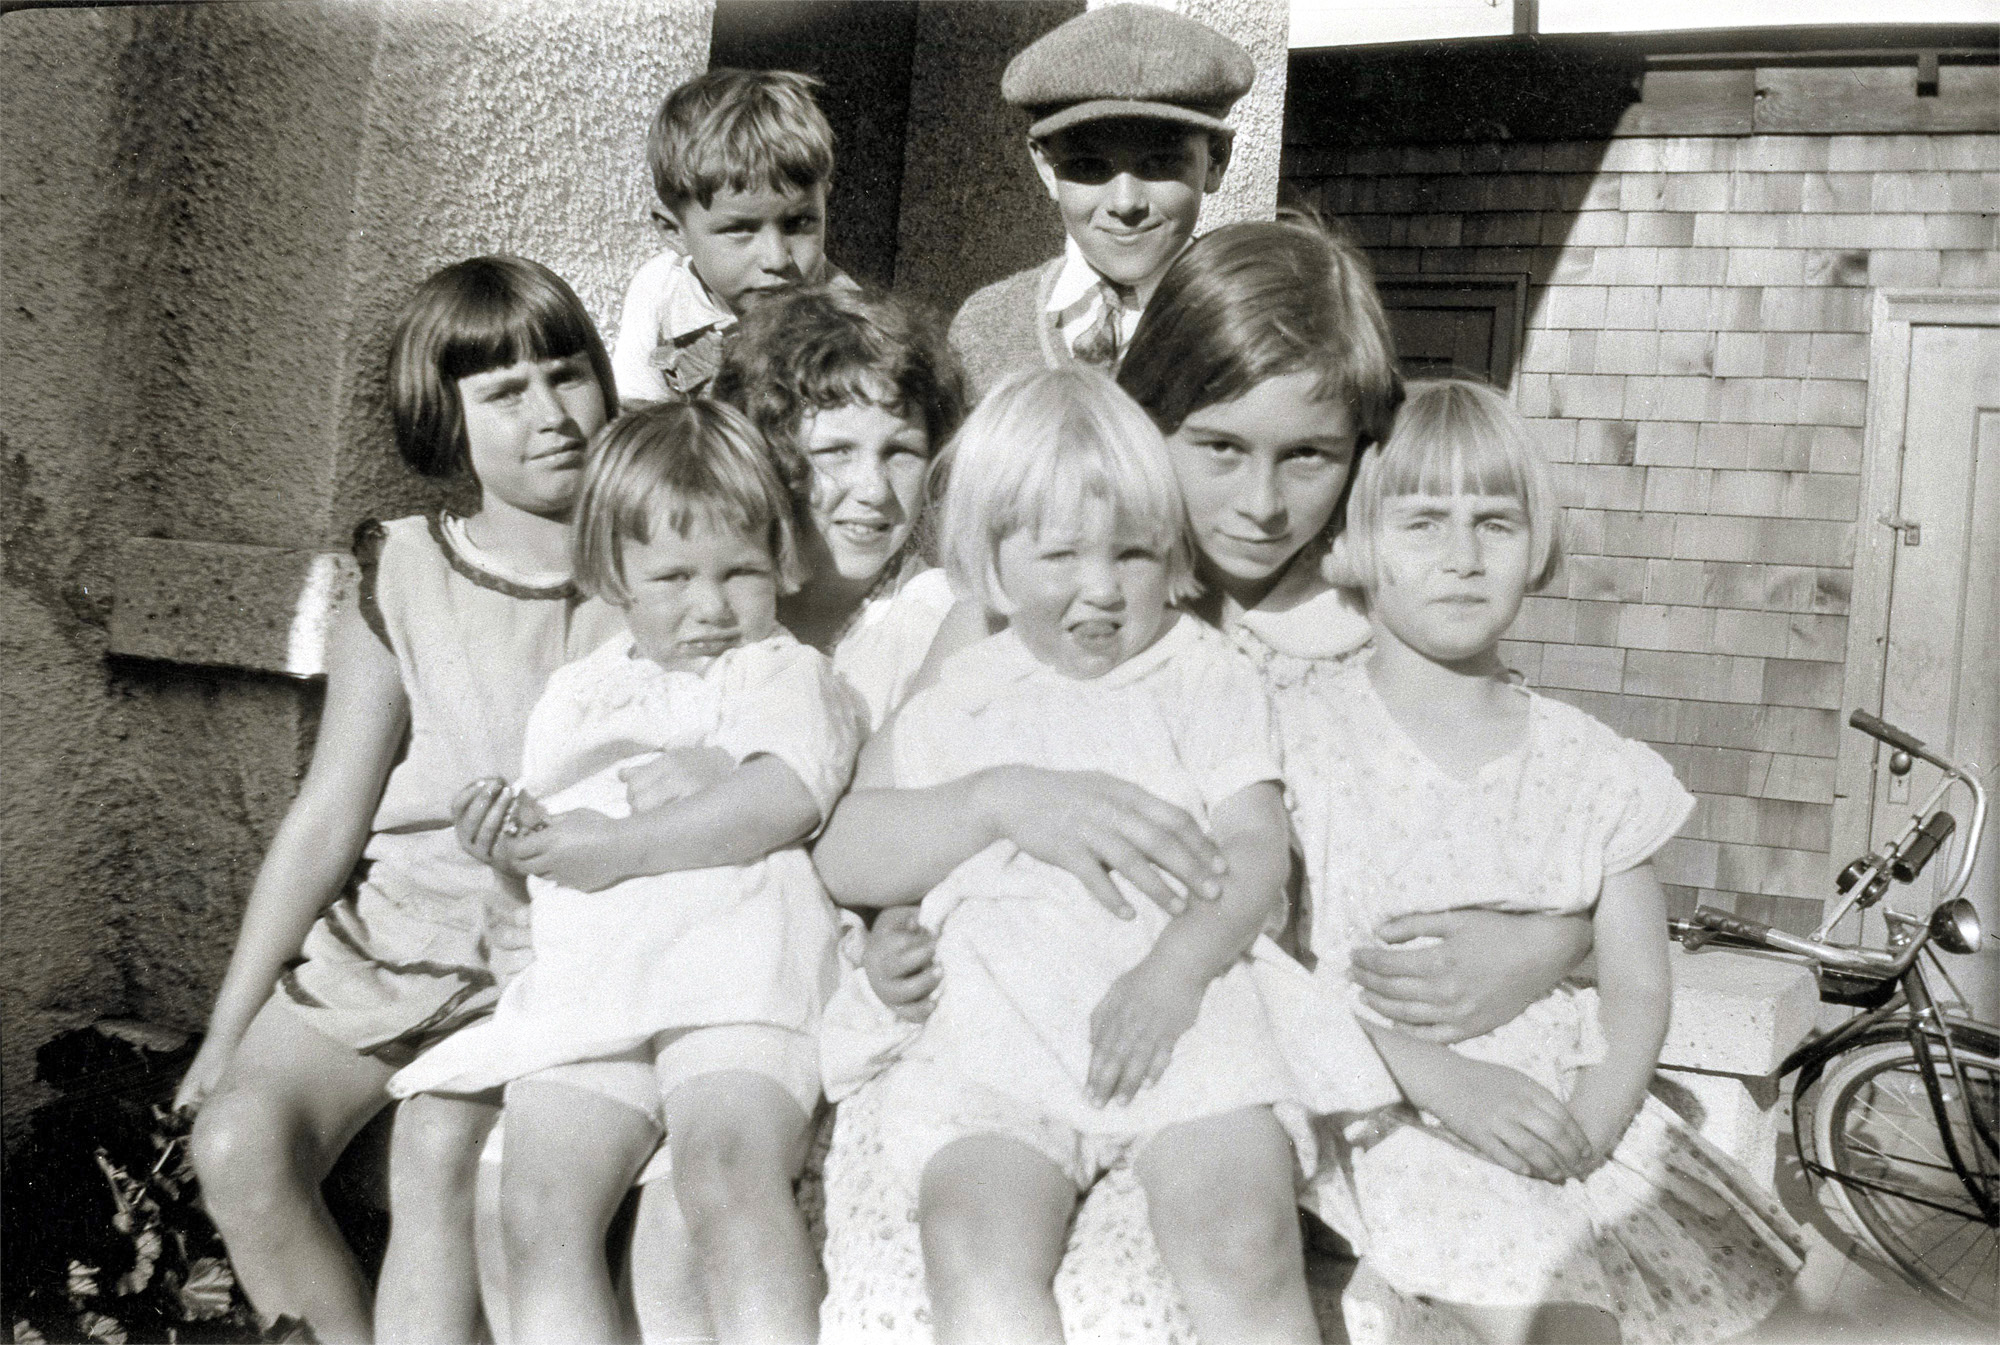 If these are all her siblings it might explain why Mom looks so unhappy. View full size.